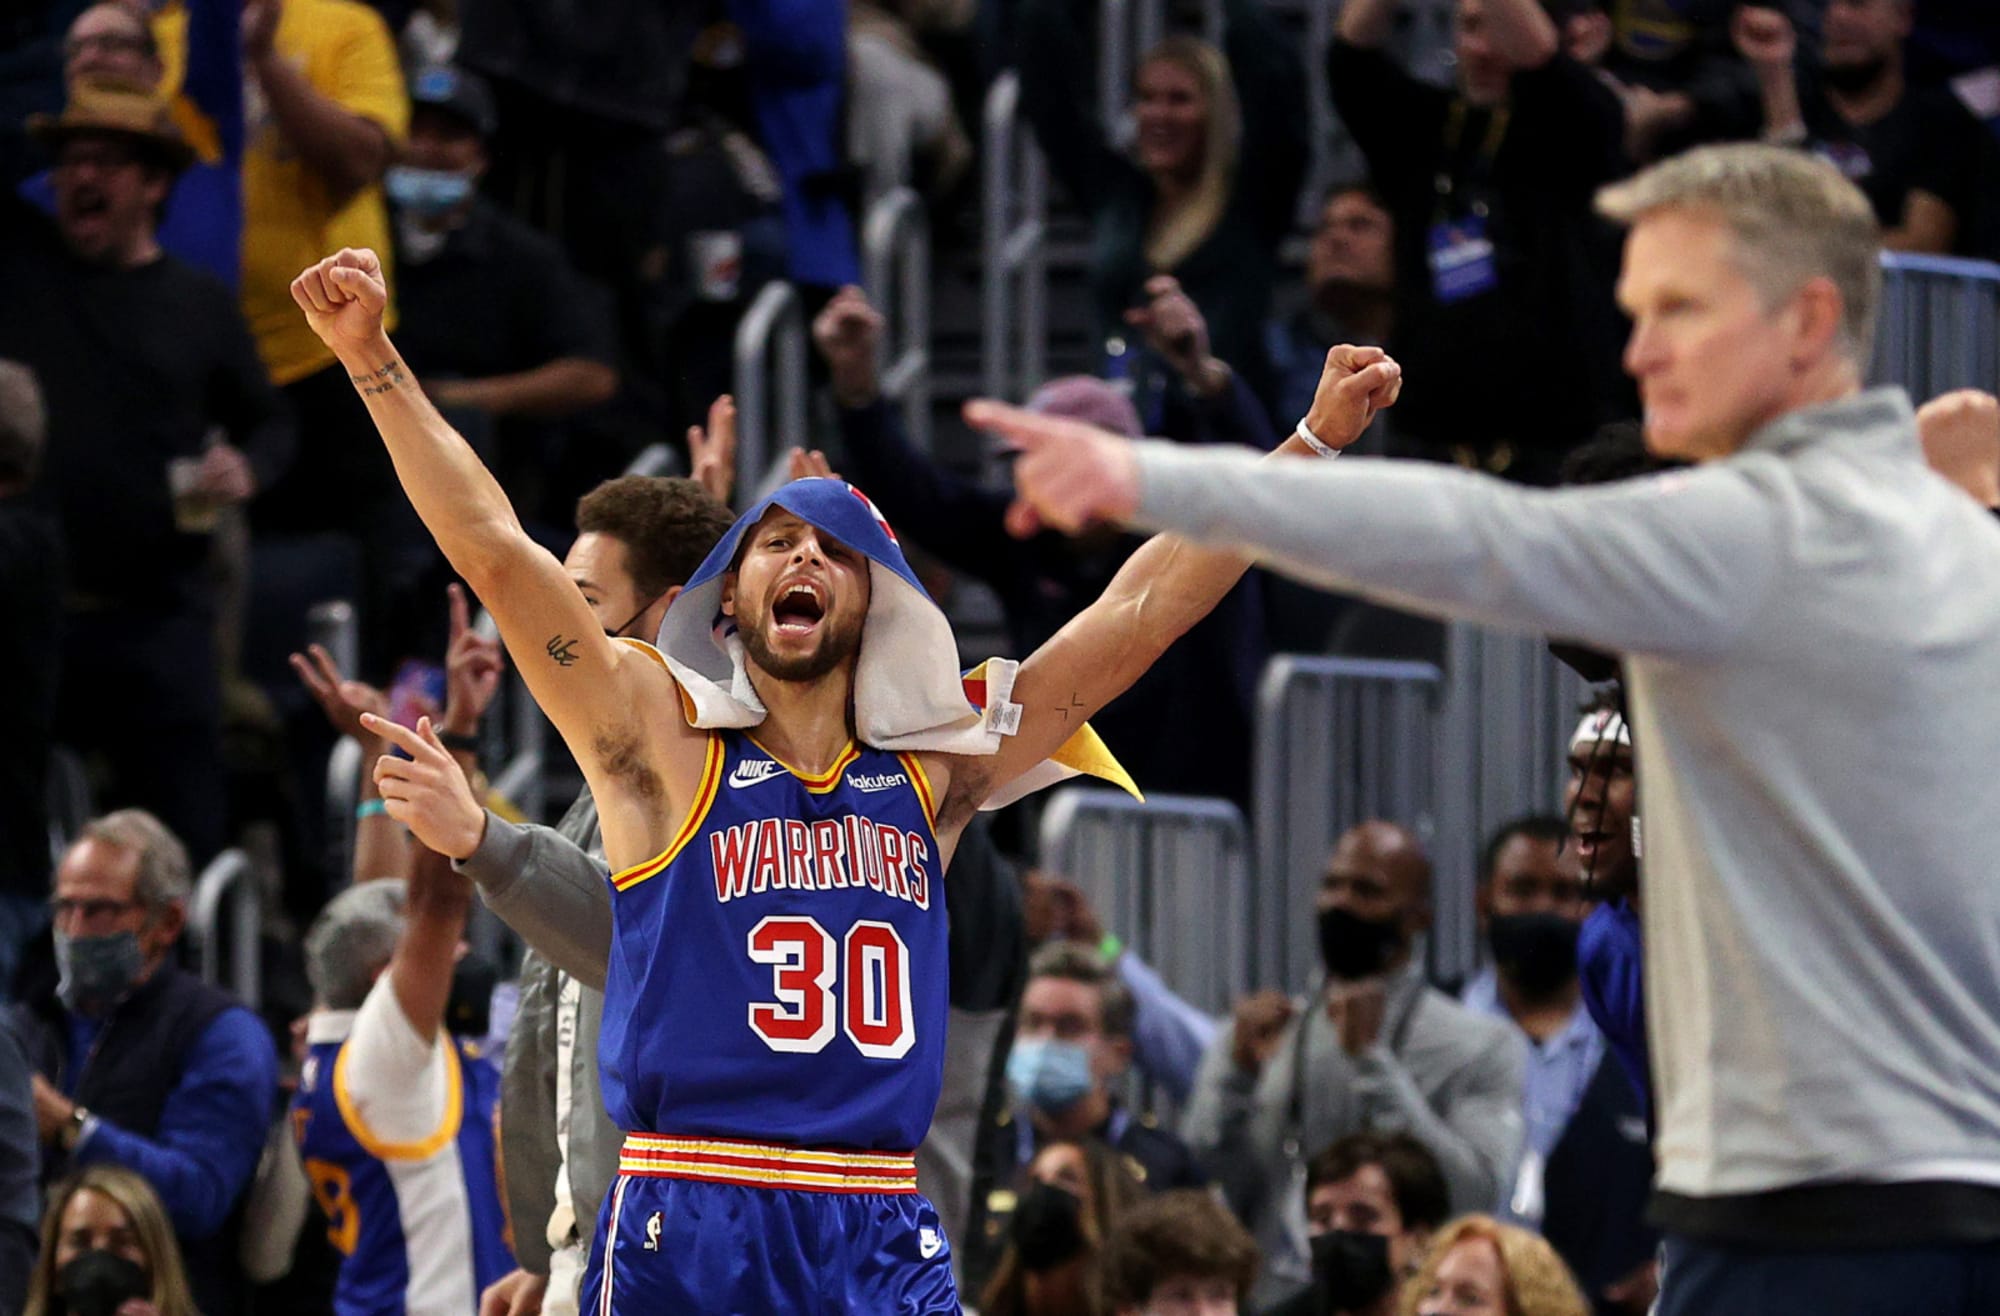 Steph Curry's 3-point record night leads Warriors over Knicks